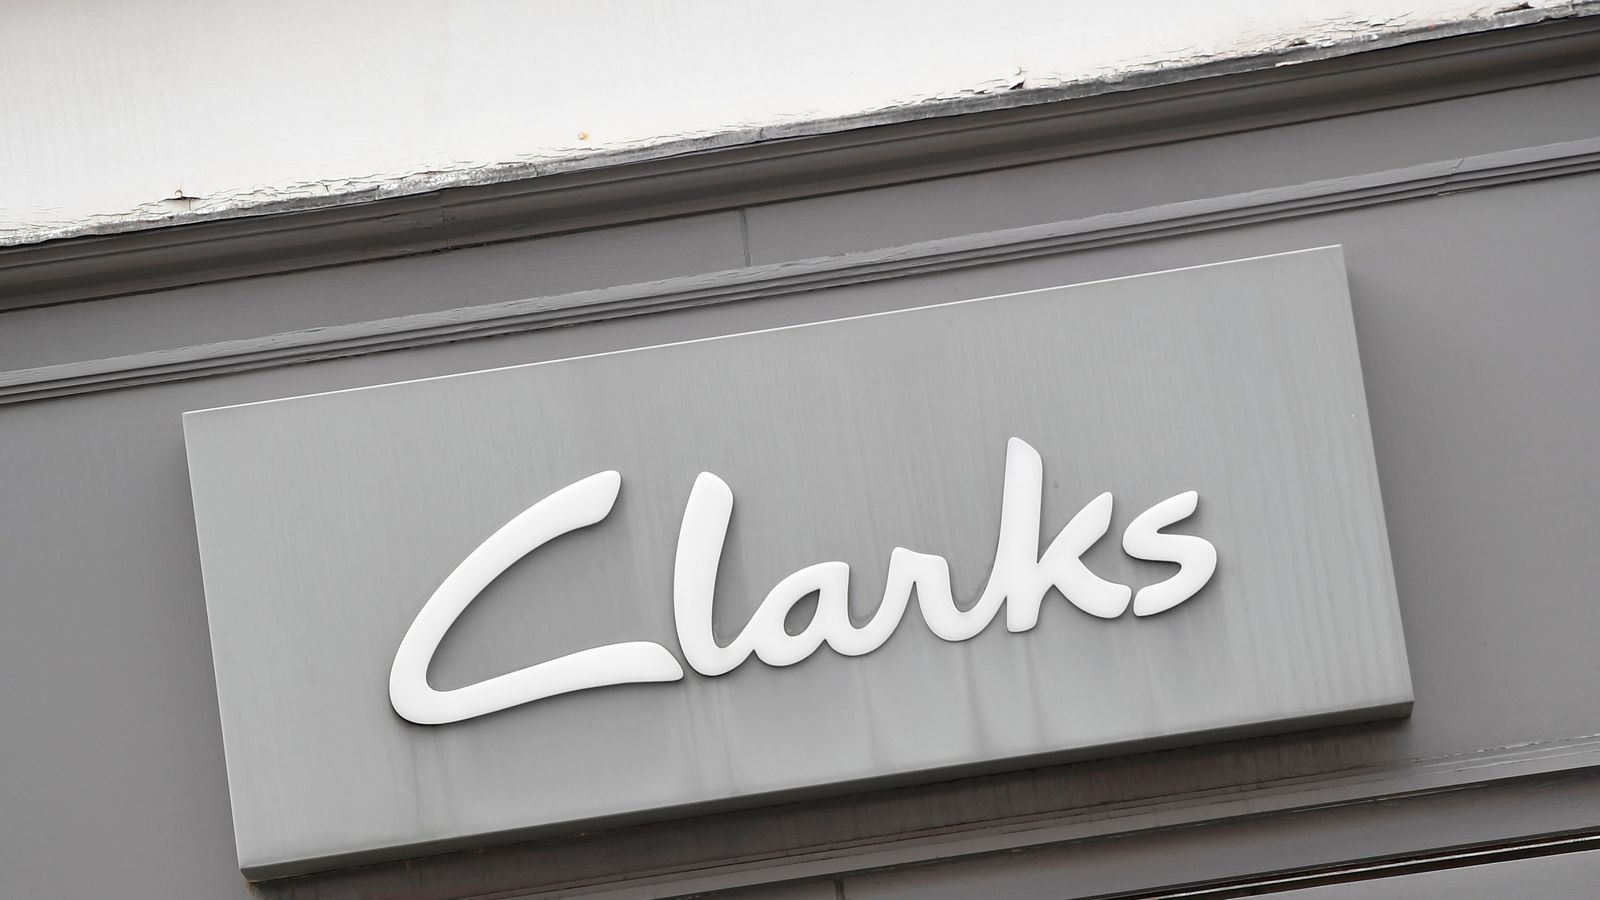 clarks closing stores